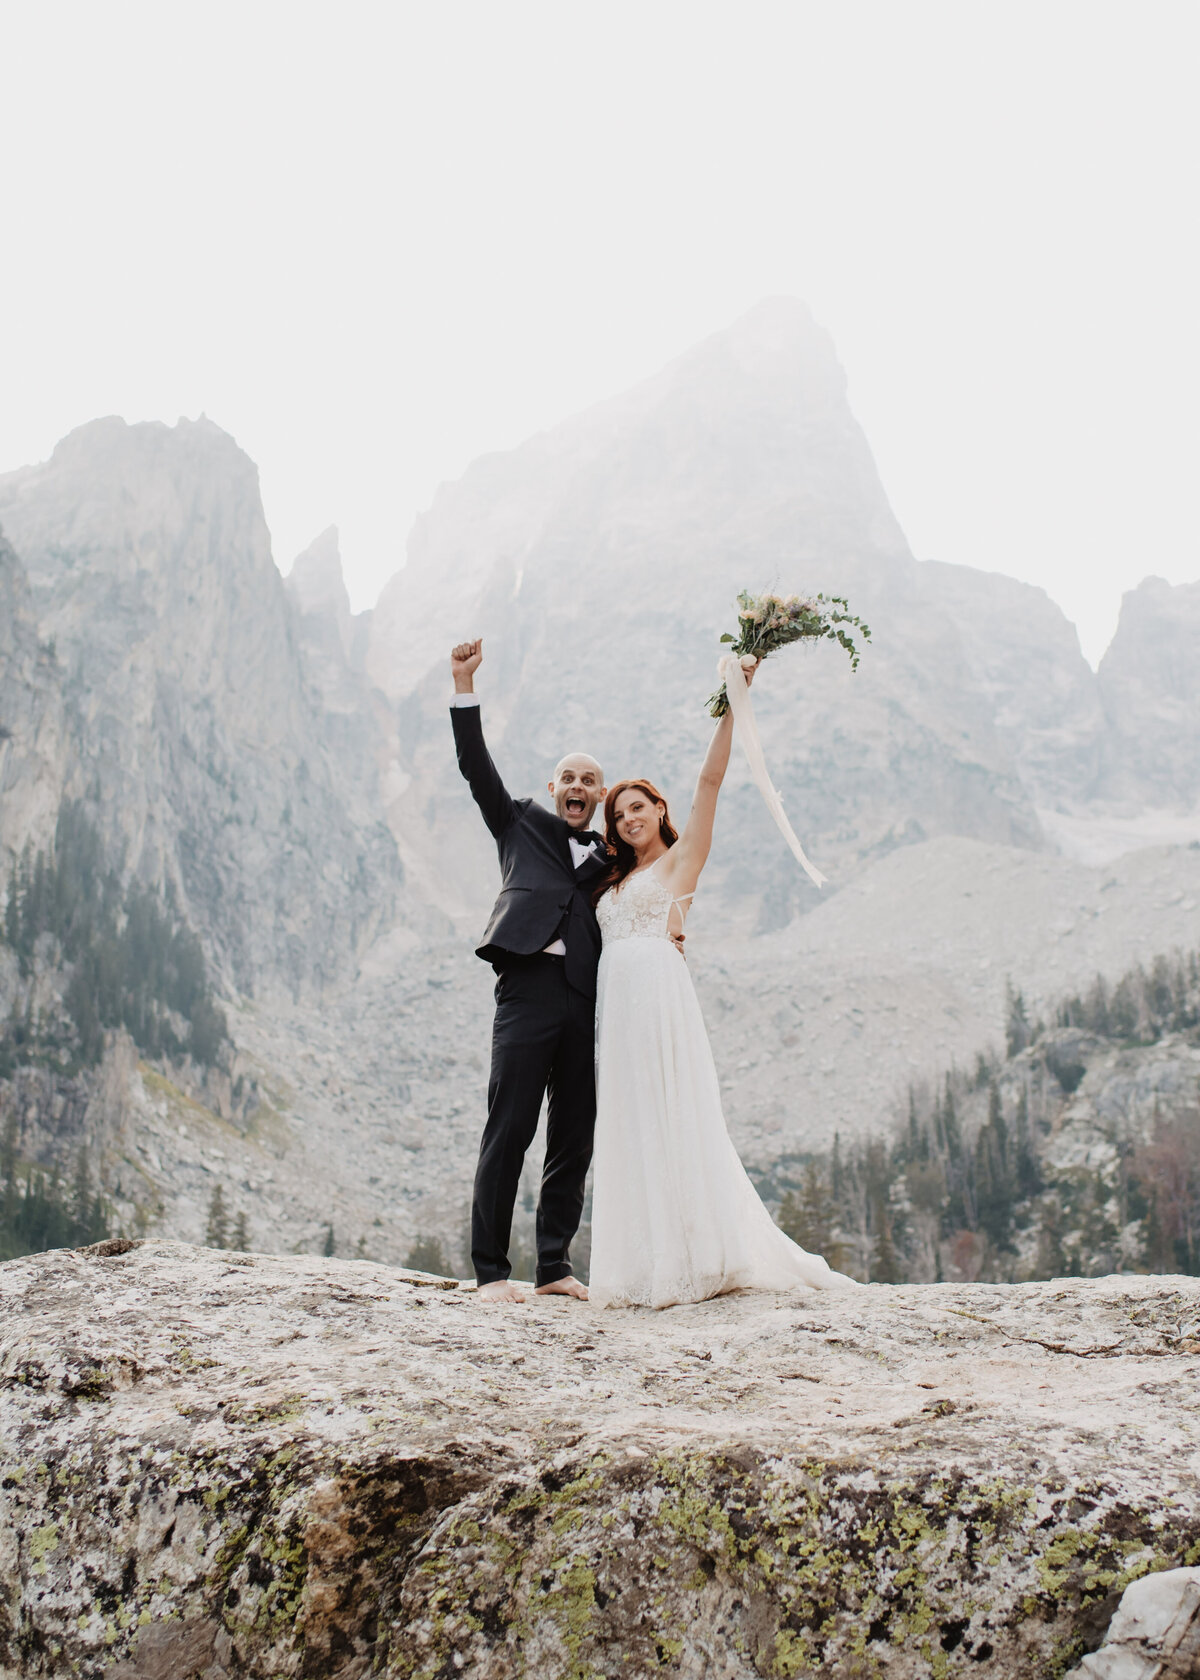 Jackson Hole photographers capture man and woman with arms in air